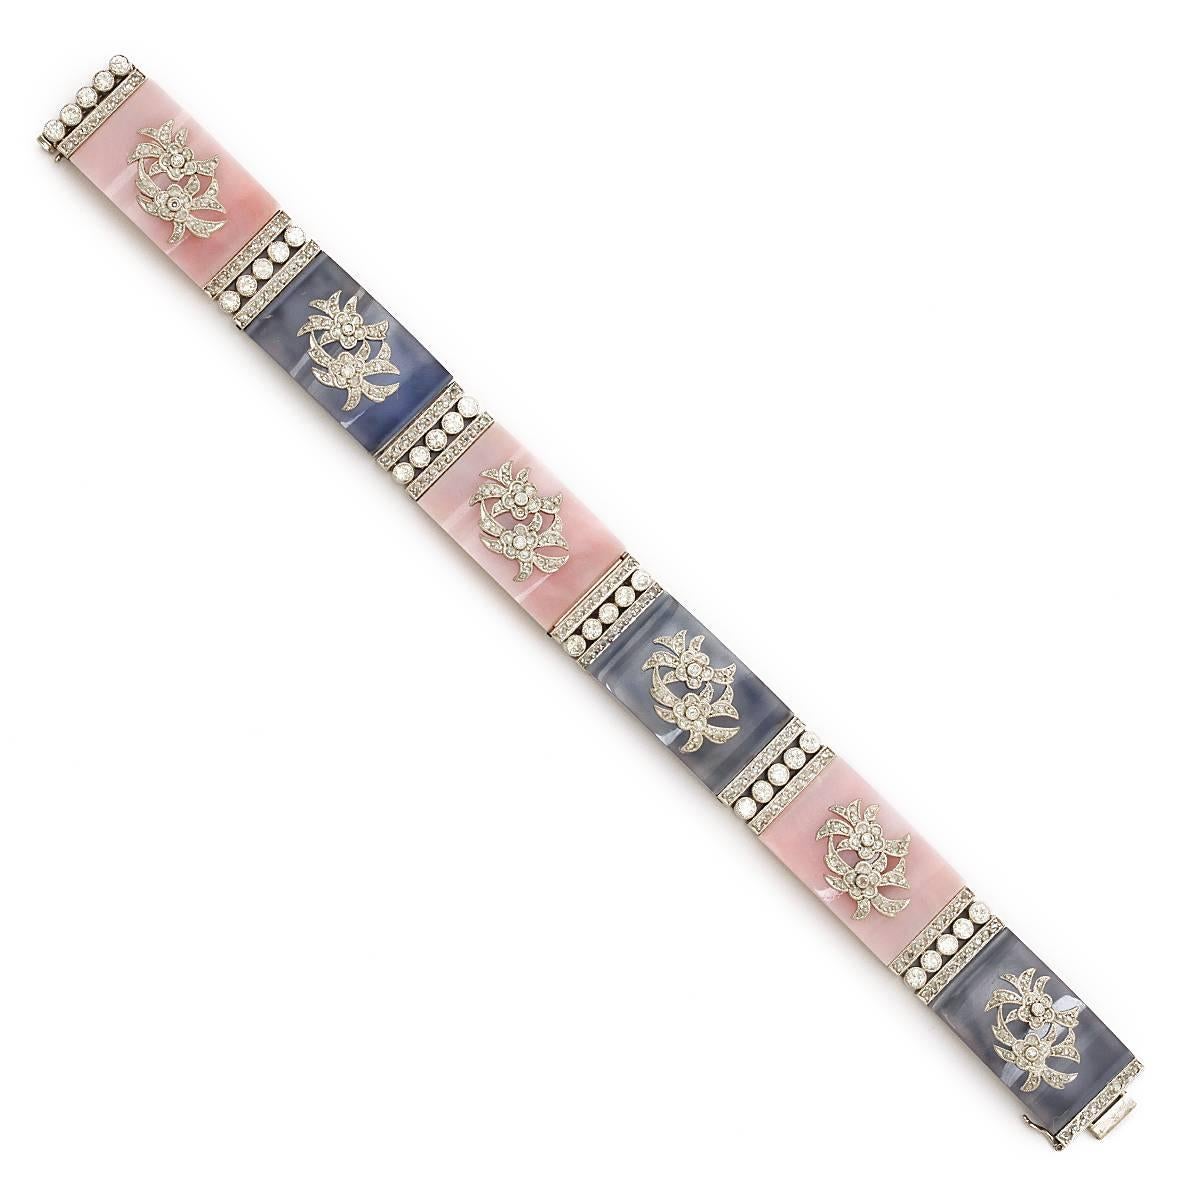 Edwardian period platinum bracelet composed of alternating pink agate and blue chalcedony panels with centering diamond floral motifs.

American, ca. 1915
Length: 7 inches